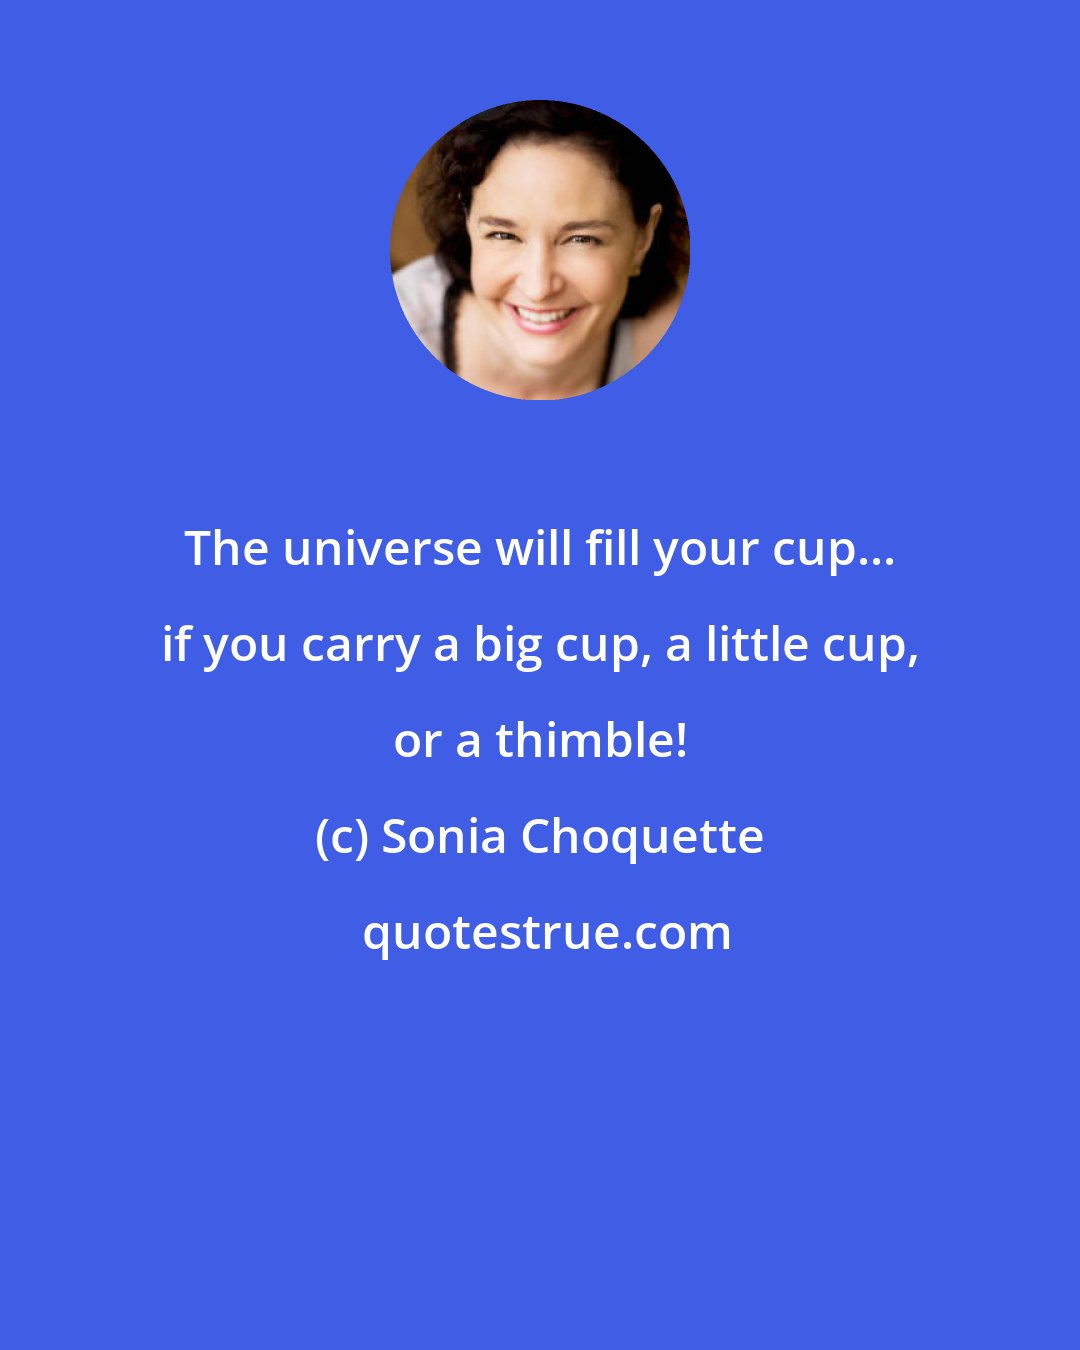 Sonia Choquette: The universe will fill your cup... if you carry a big cup, a little cup, or a thimble!